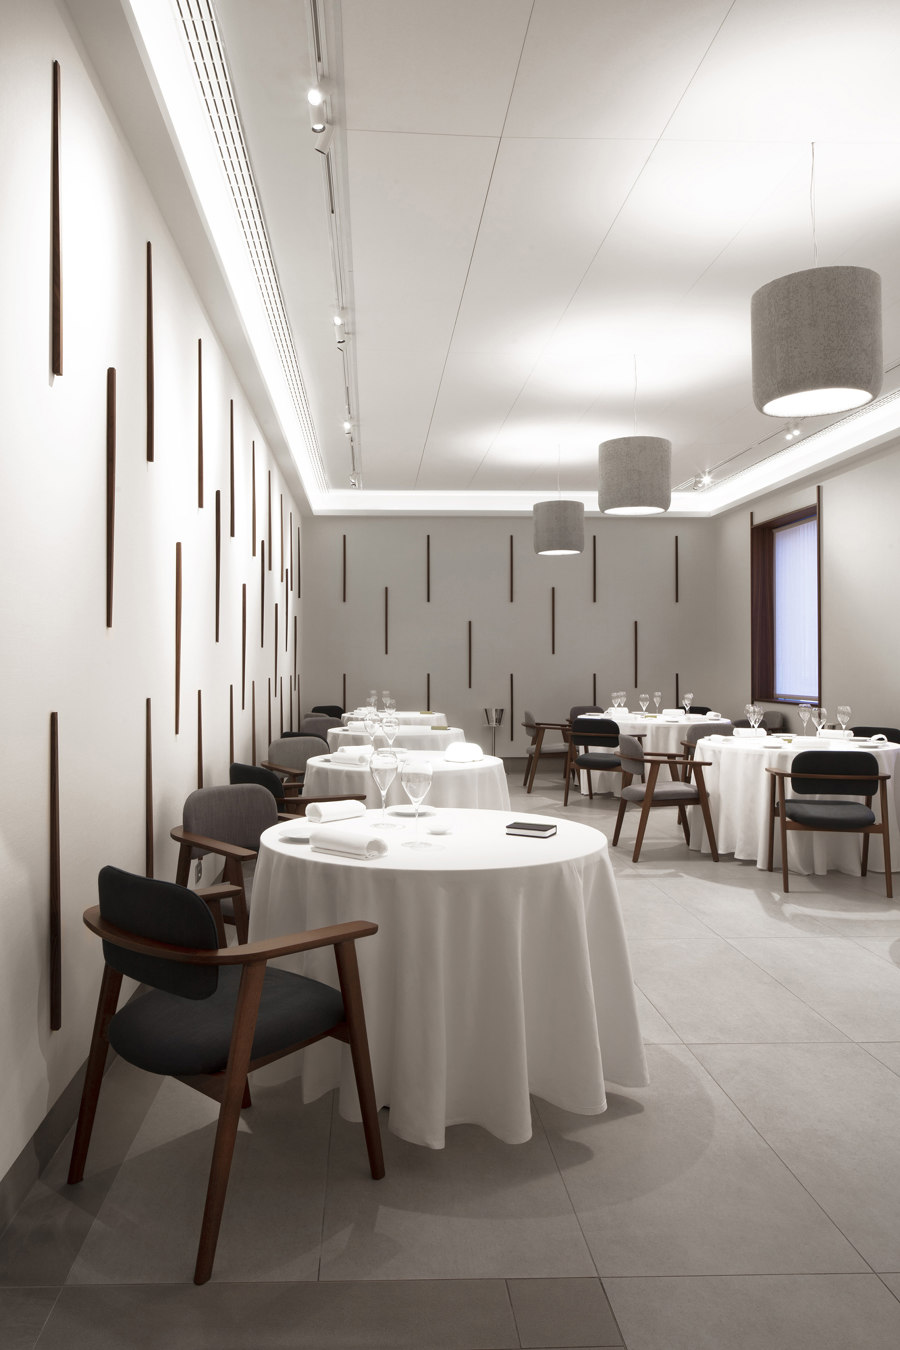 A sound and sensory experience at 2-star Michelin restaurant |  | BuzziSpace